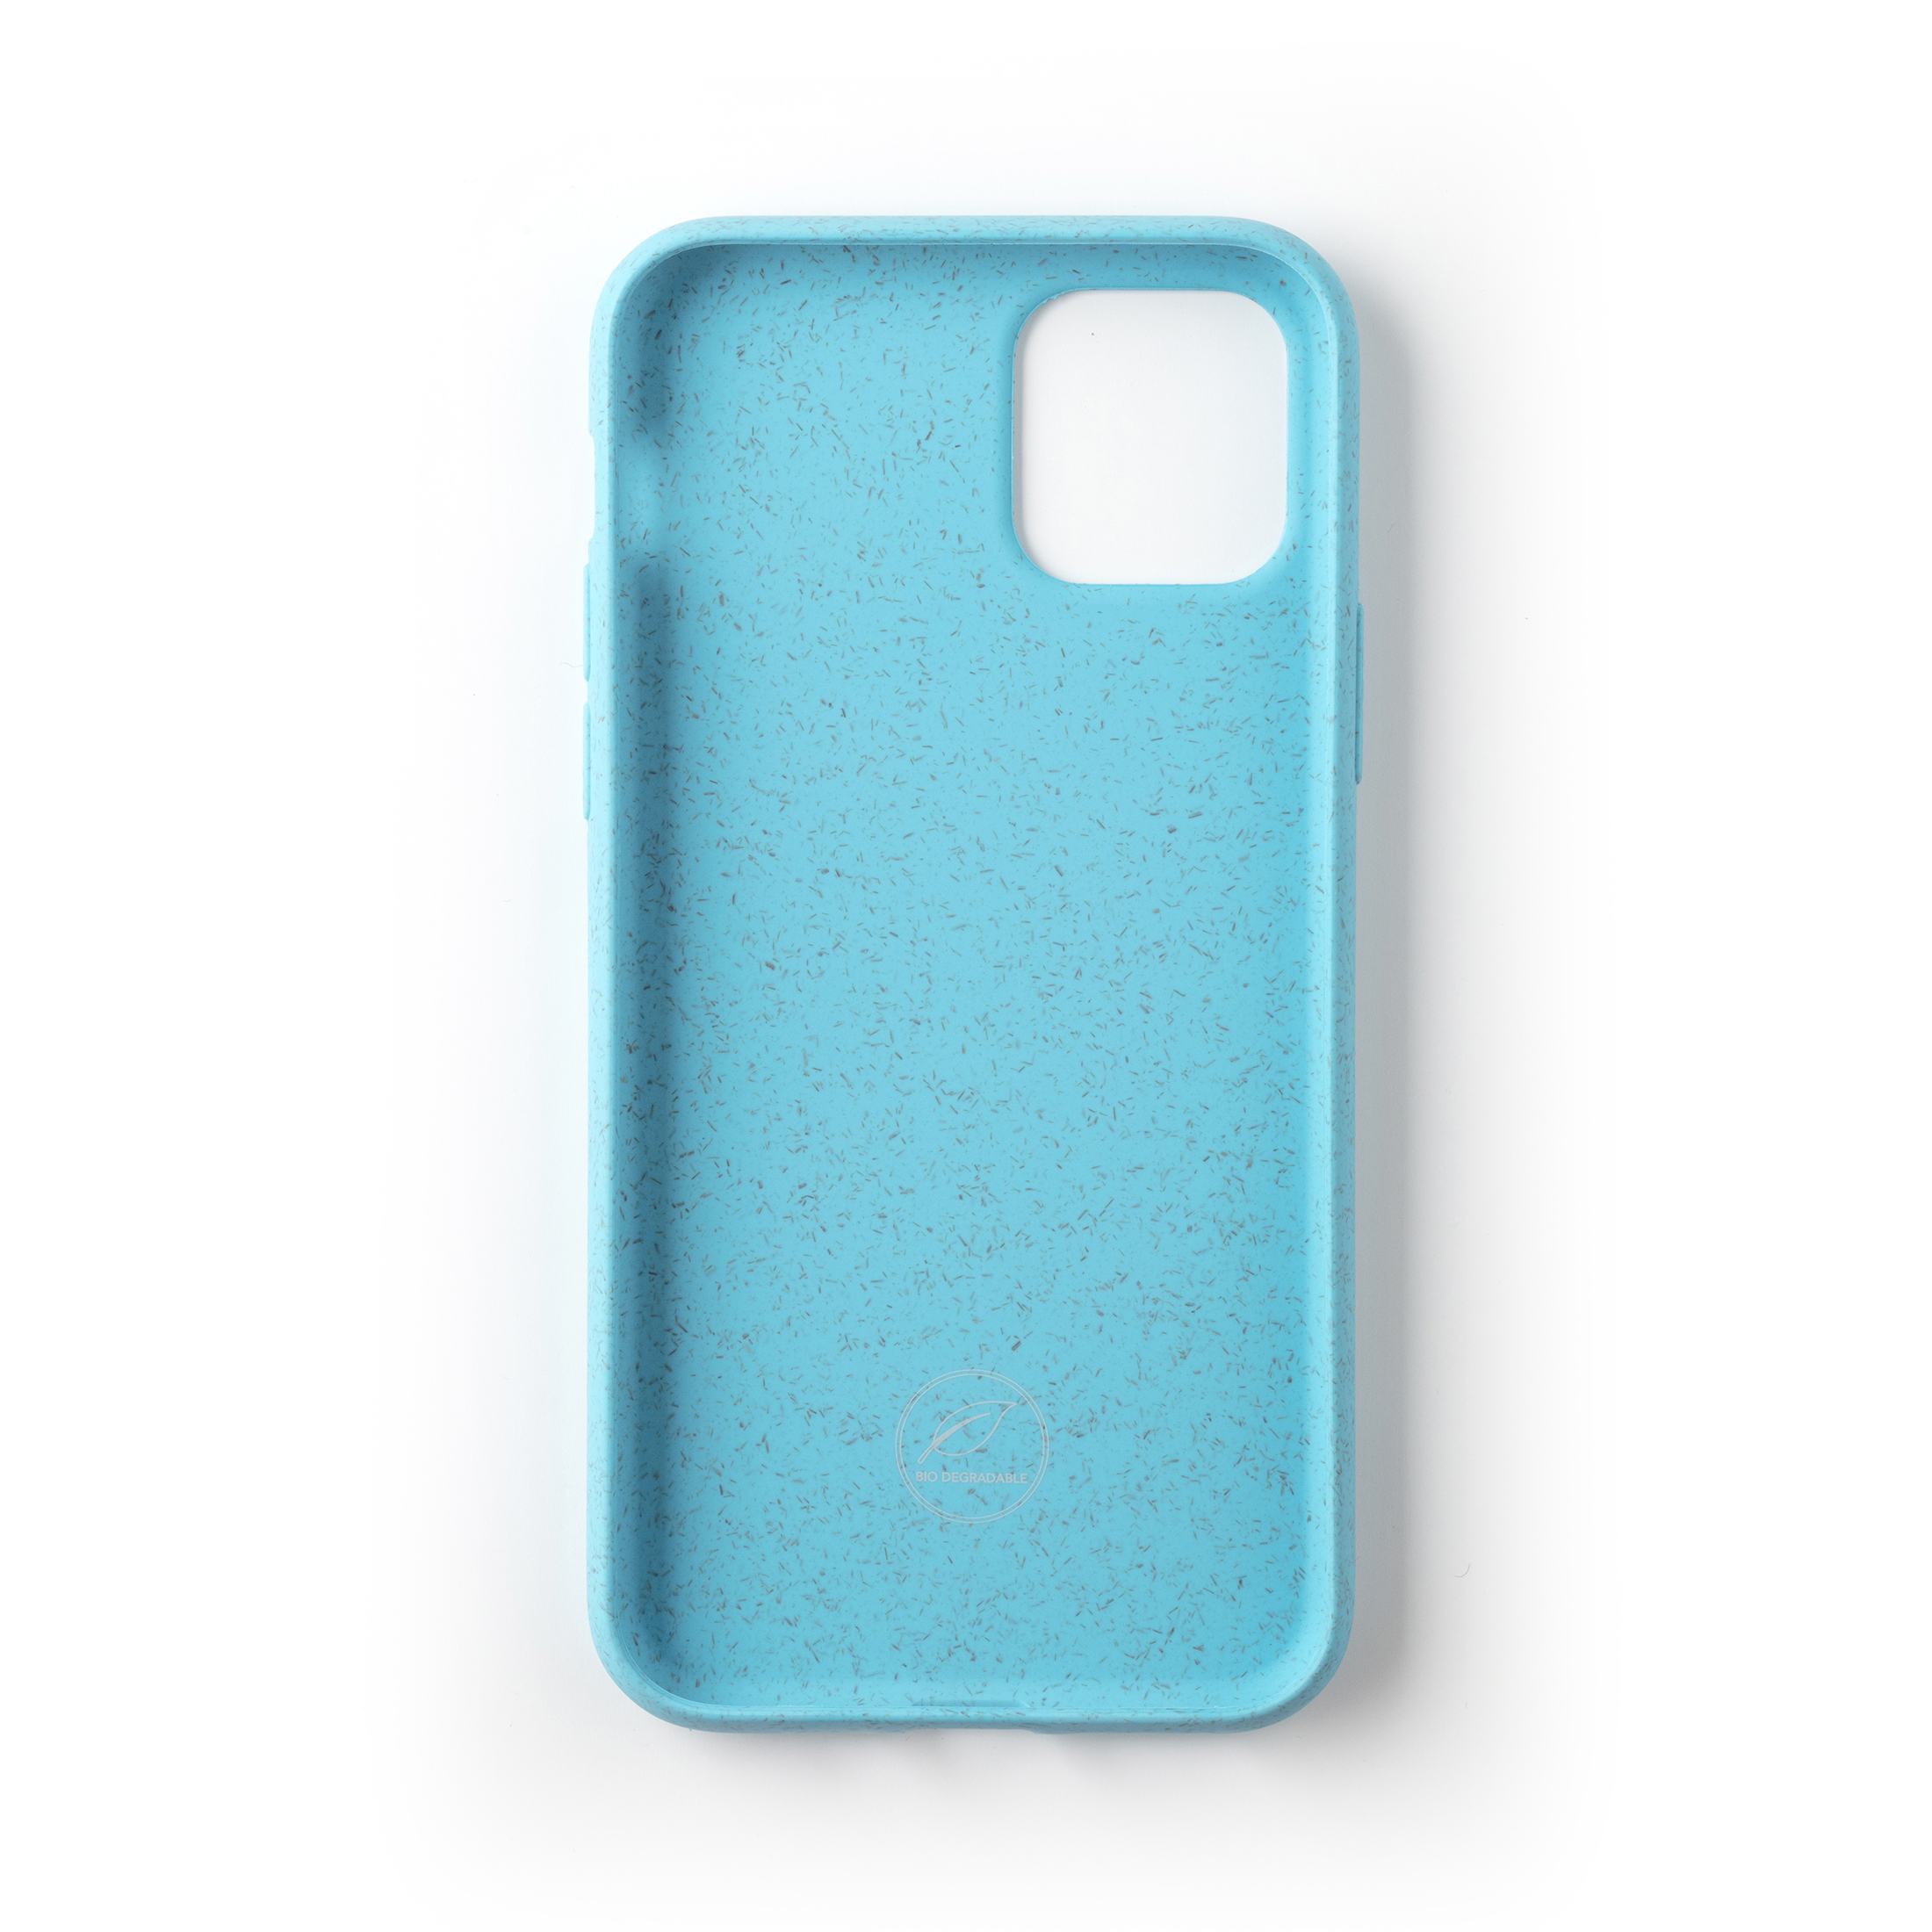 ECO FASHION BY WILMA RIP11, Apple, light PRO, iPhone blue 11 Backcover